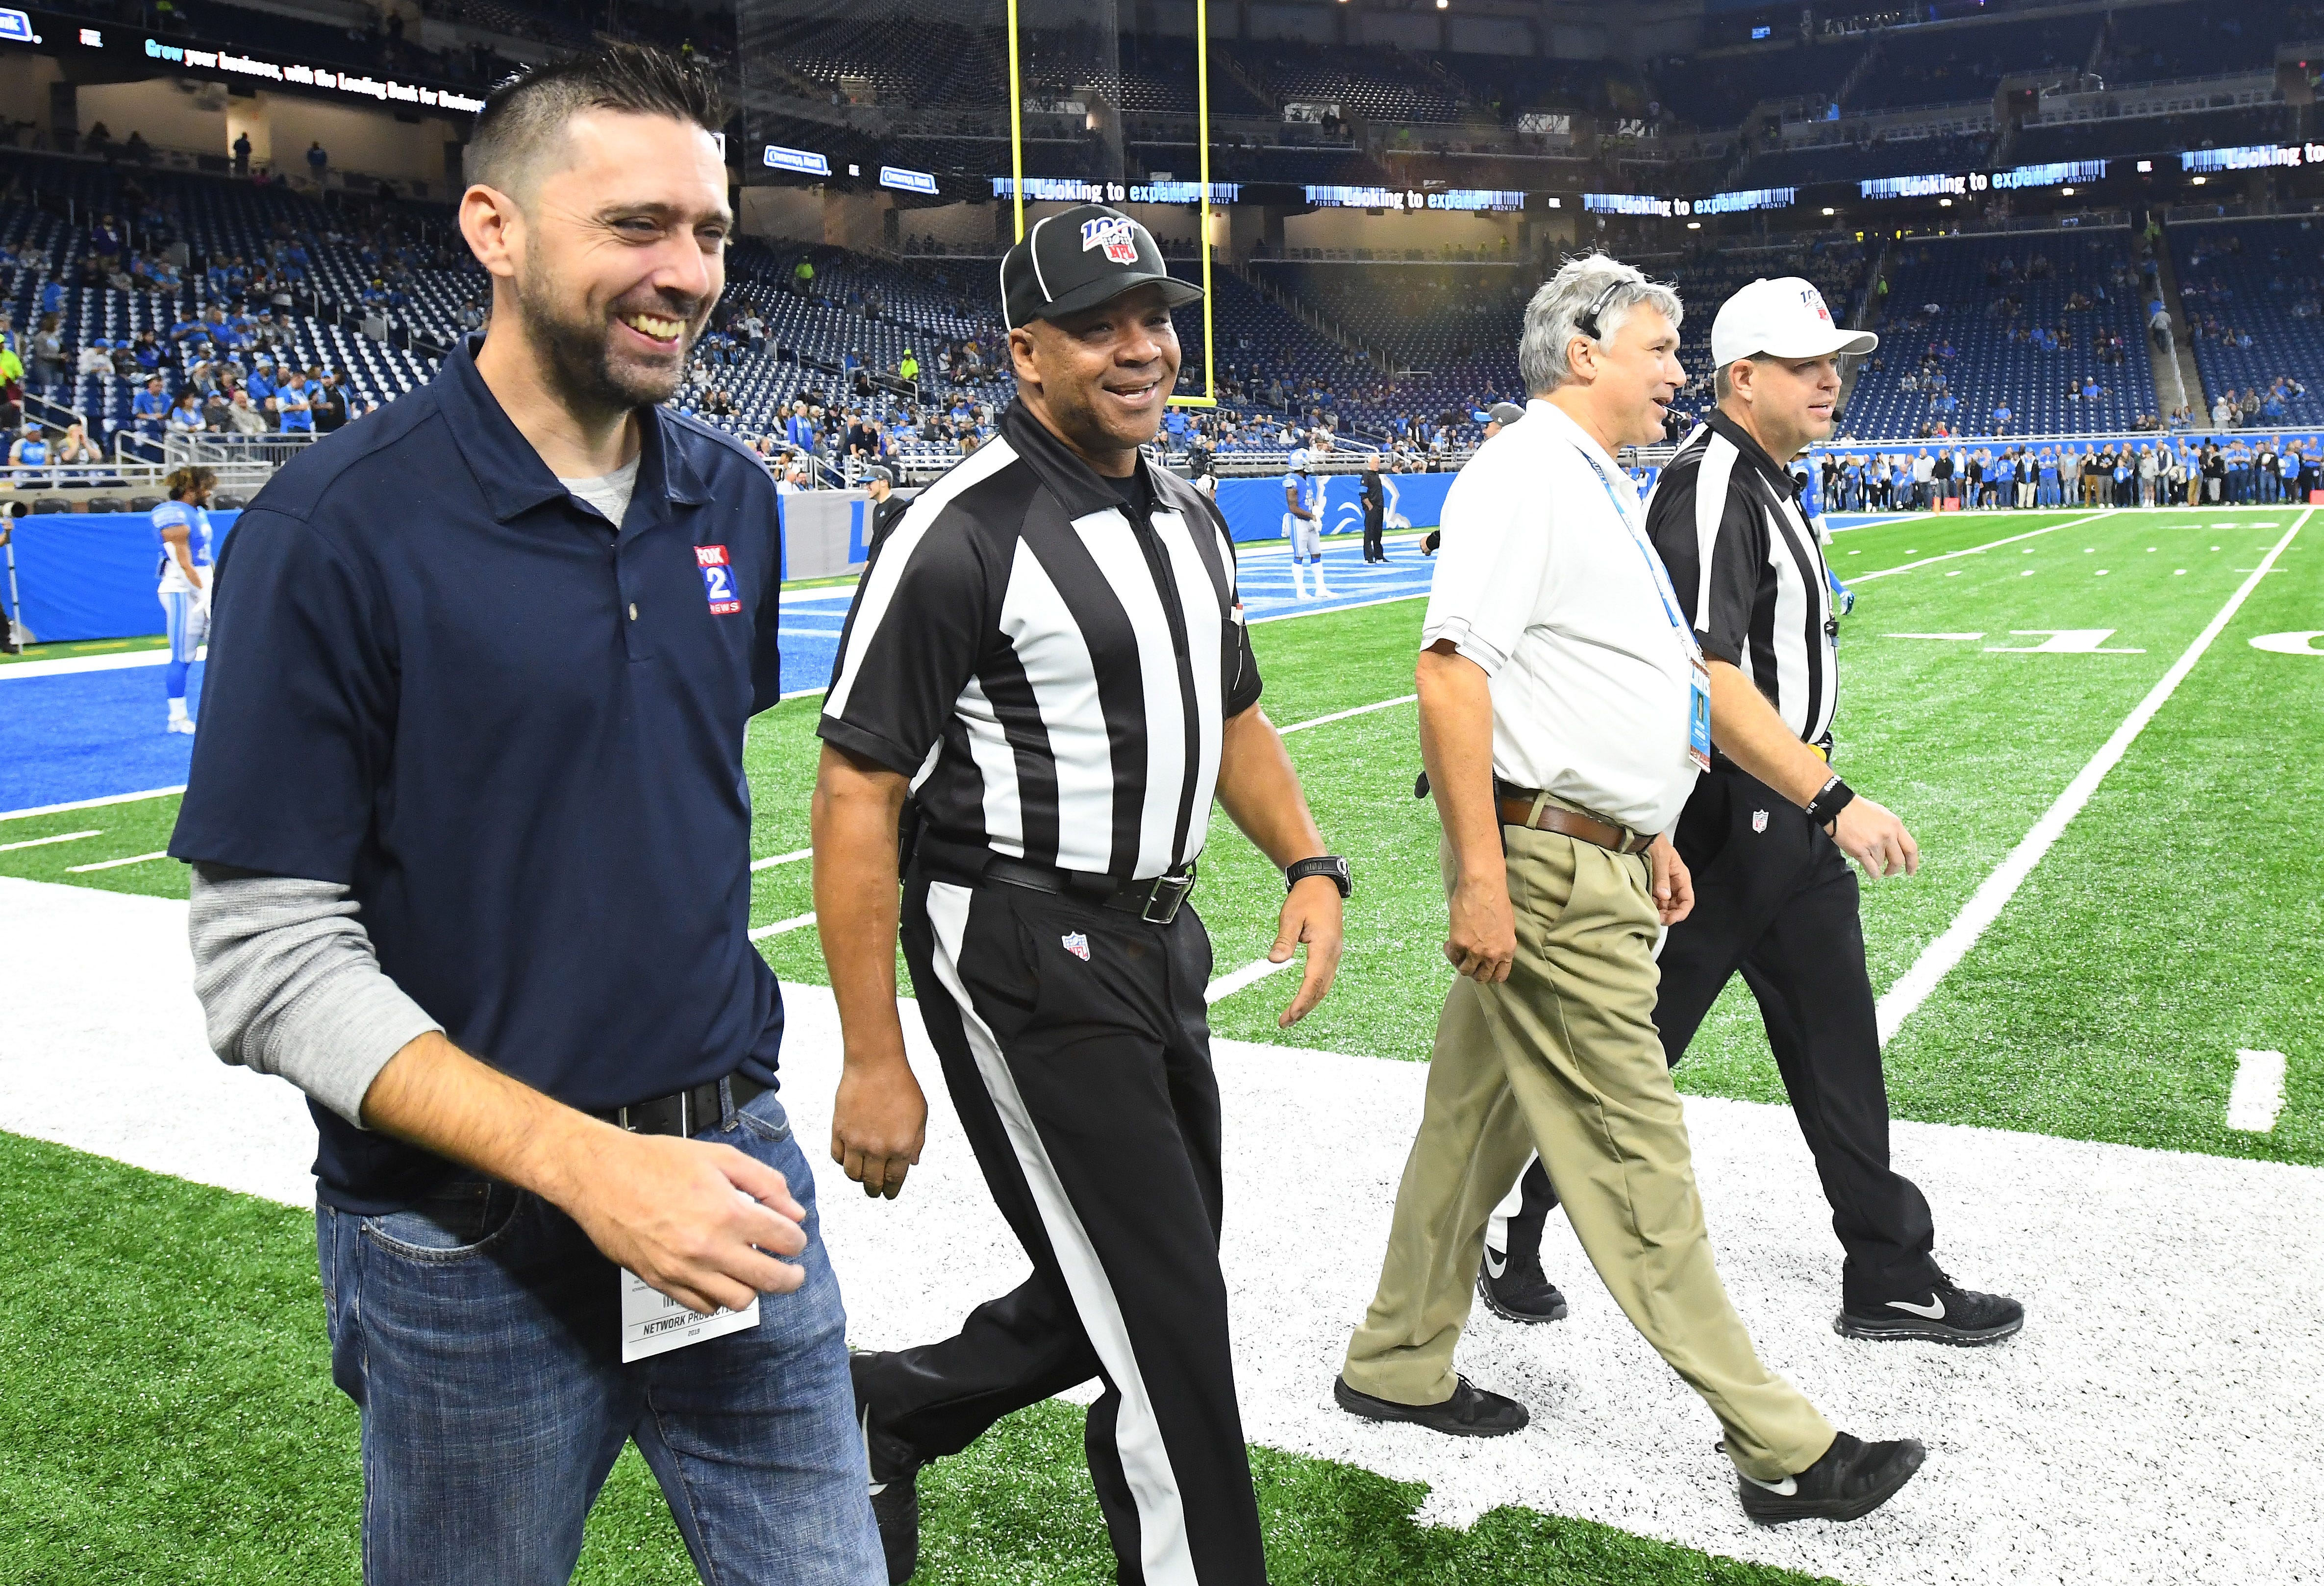 NFL officials break into smiles as the crowd at Ford Field boos the refs, after a controversial call last week that went against Detroit.